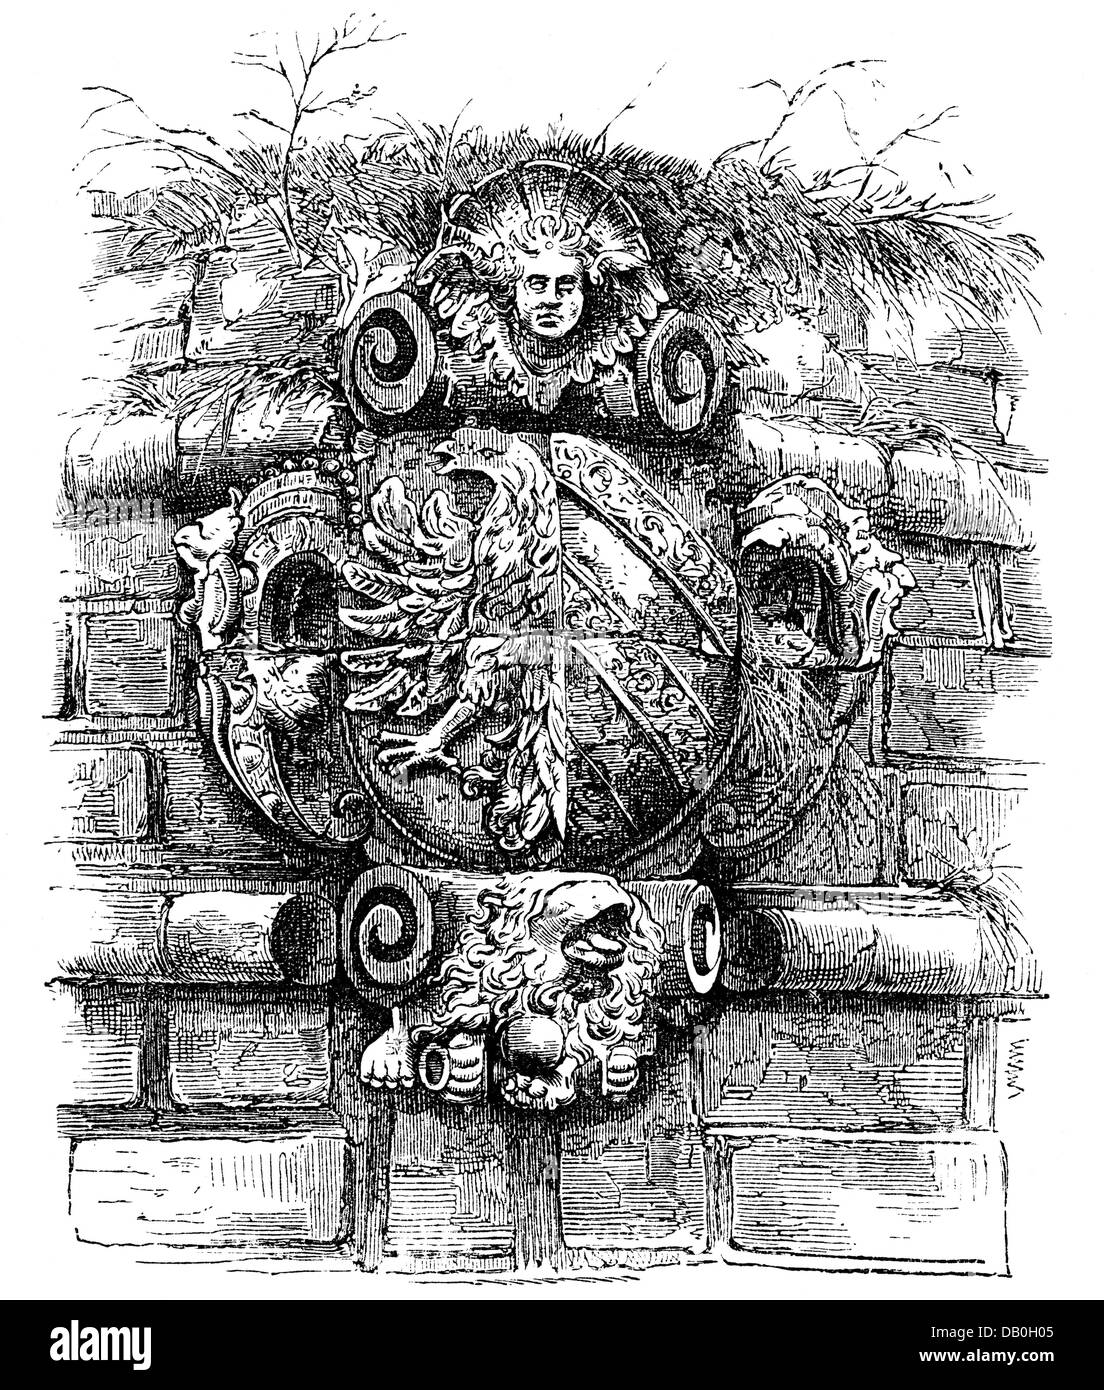 heraldry, coat of arms, Germany, city arms, Nuremberg, relief at Woehrder Gate bastion (until 1871), wood engraving, late 19th century, eagle, Middle Franconia, Kingdom of Bavaria, German Empire, Imperial Era, Central Europe, historic, historical, Wohrder, Wohrdertor, Woehrdertor, Wohrdertor, Wöhrdertor, Wöhrder, Additional-Rights-Clearences-Not Available Stock Photo